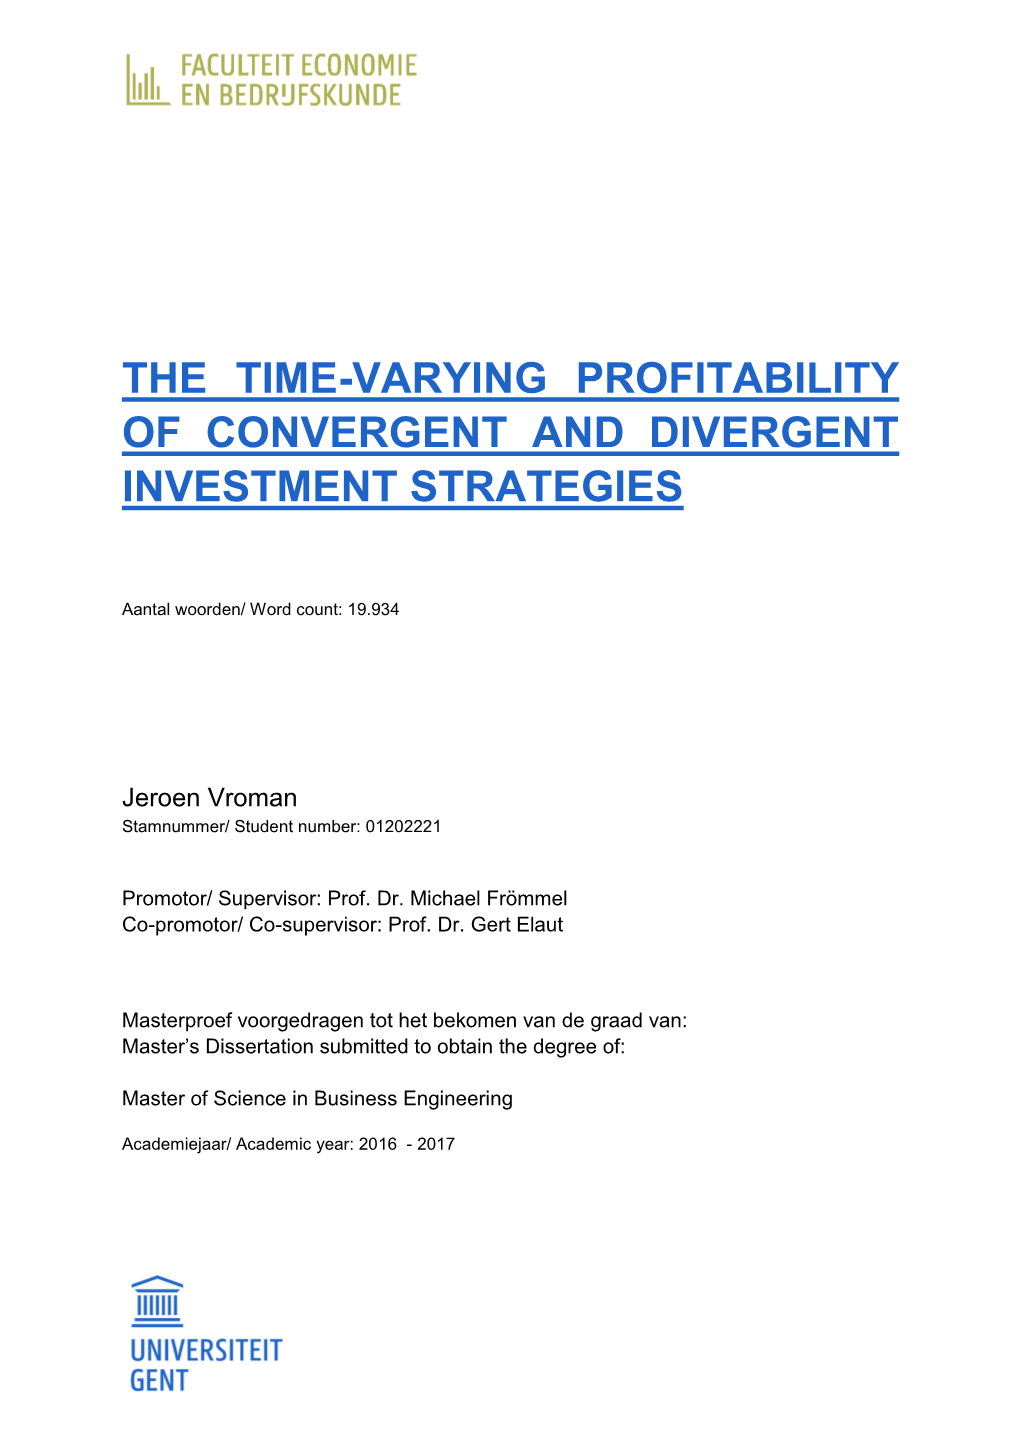 The Time-Varying Profitability of Convergent and Divergent Investment Strategies